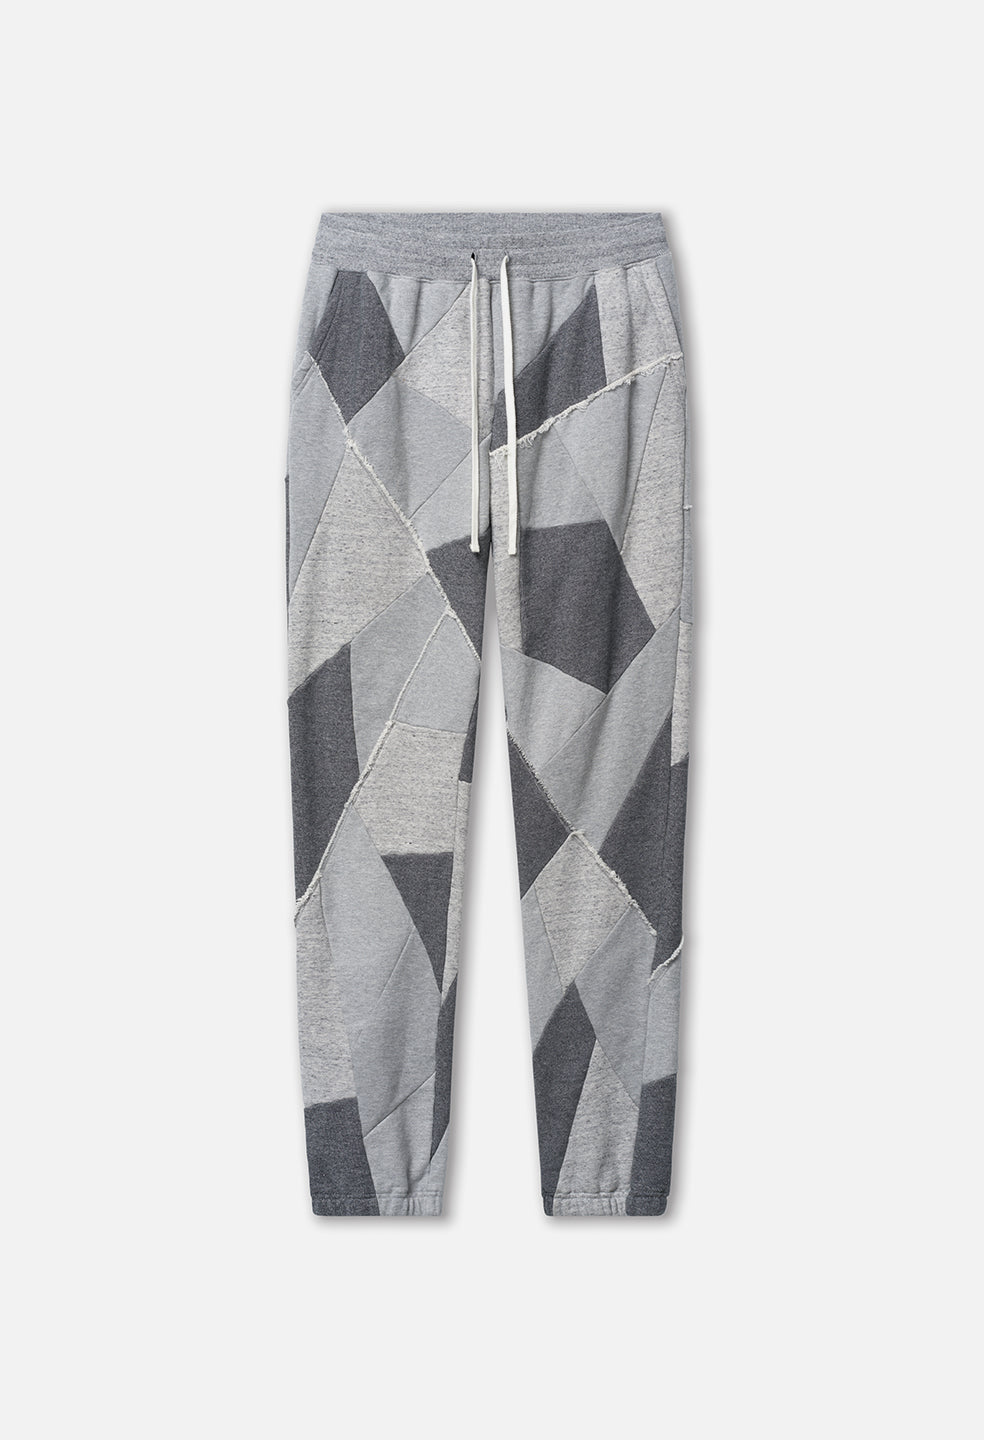 Quilted Sweatpants - Heather Grey – Bette's